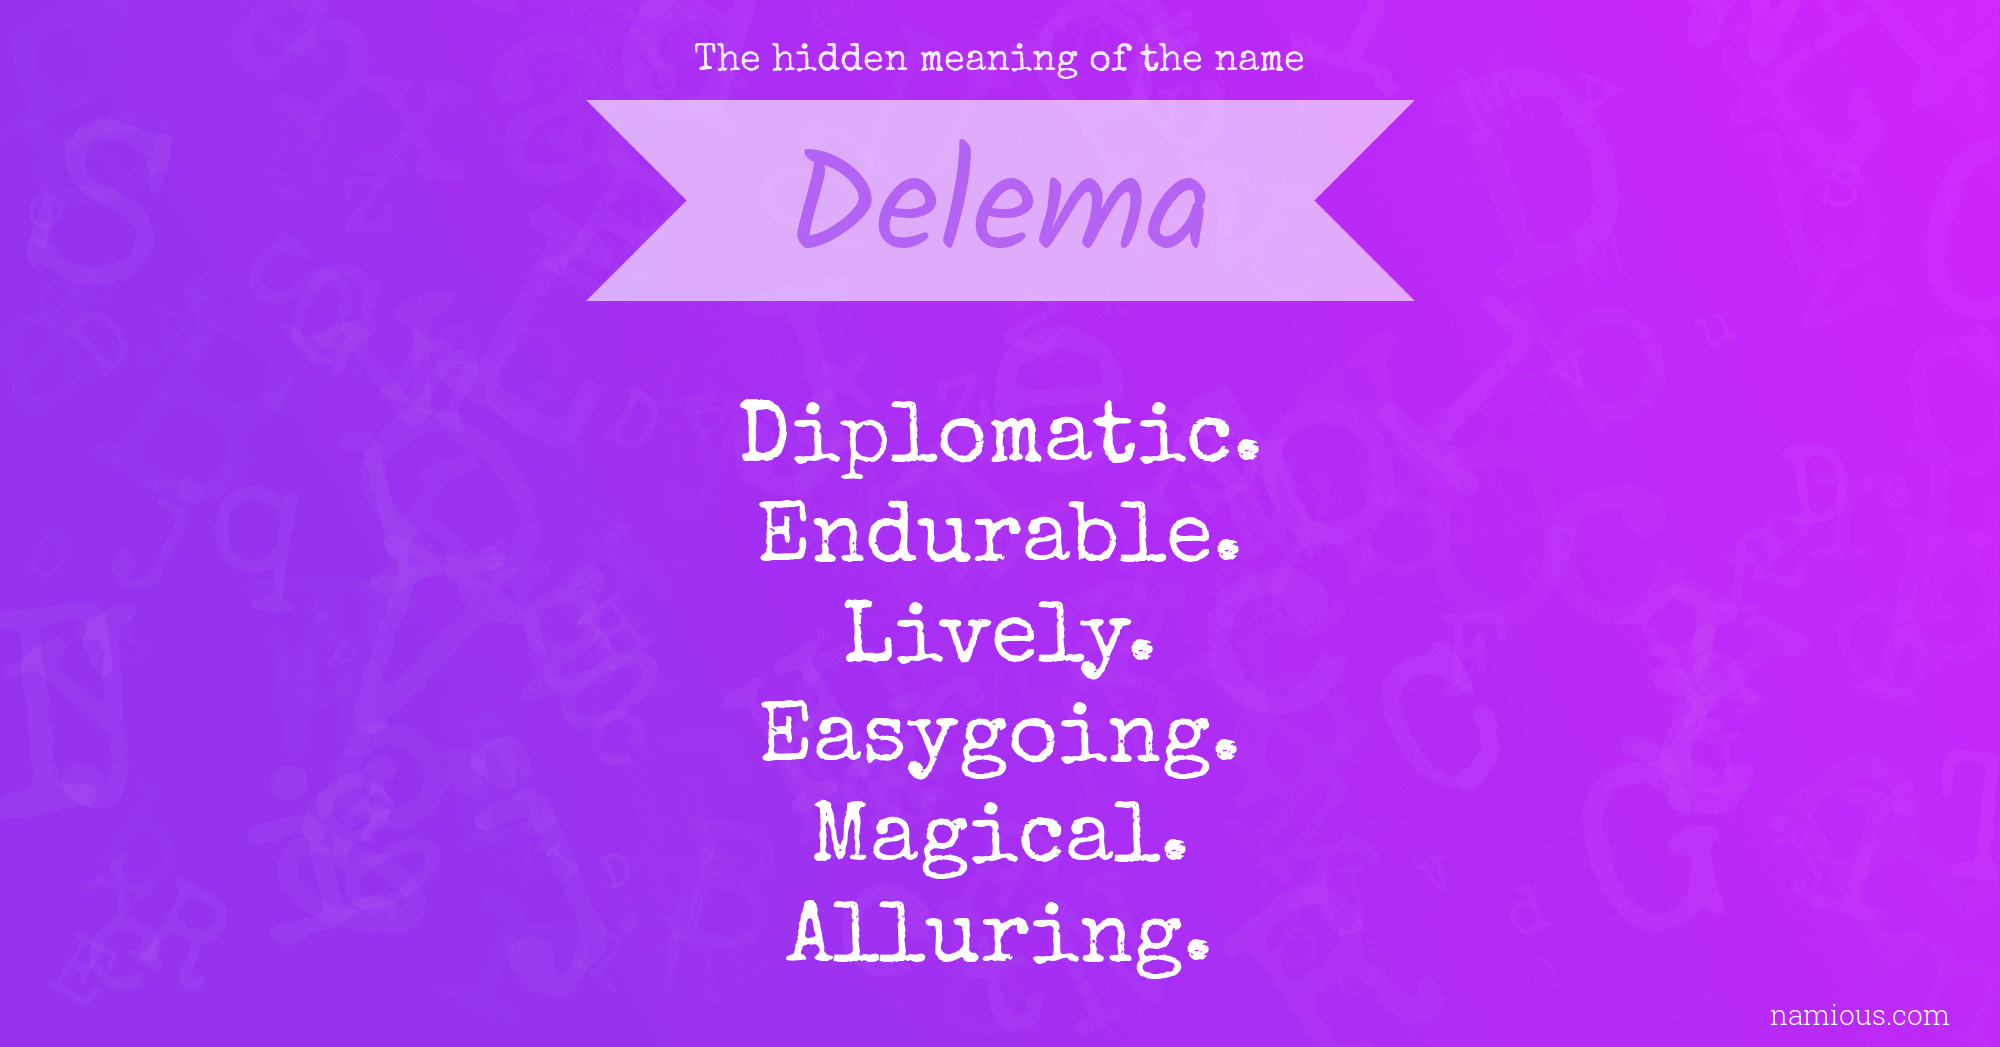 The hidden meaning of the name Delema